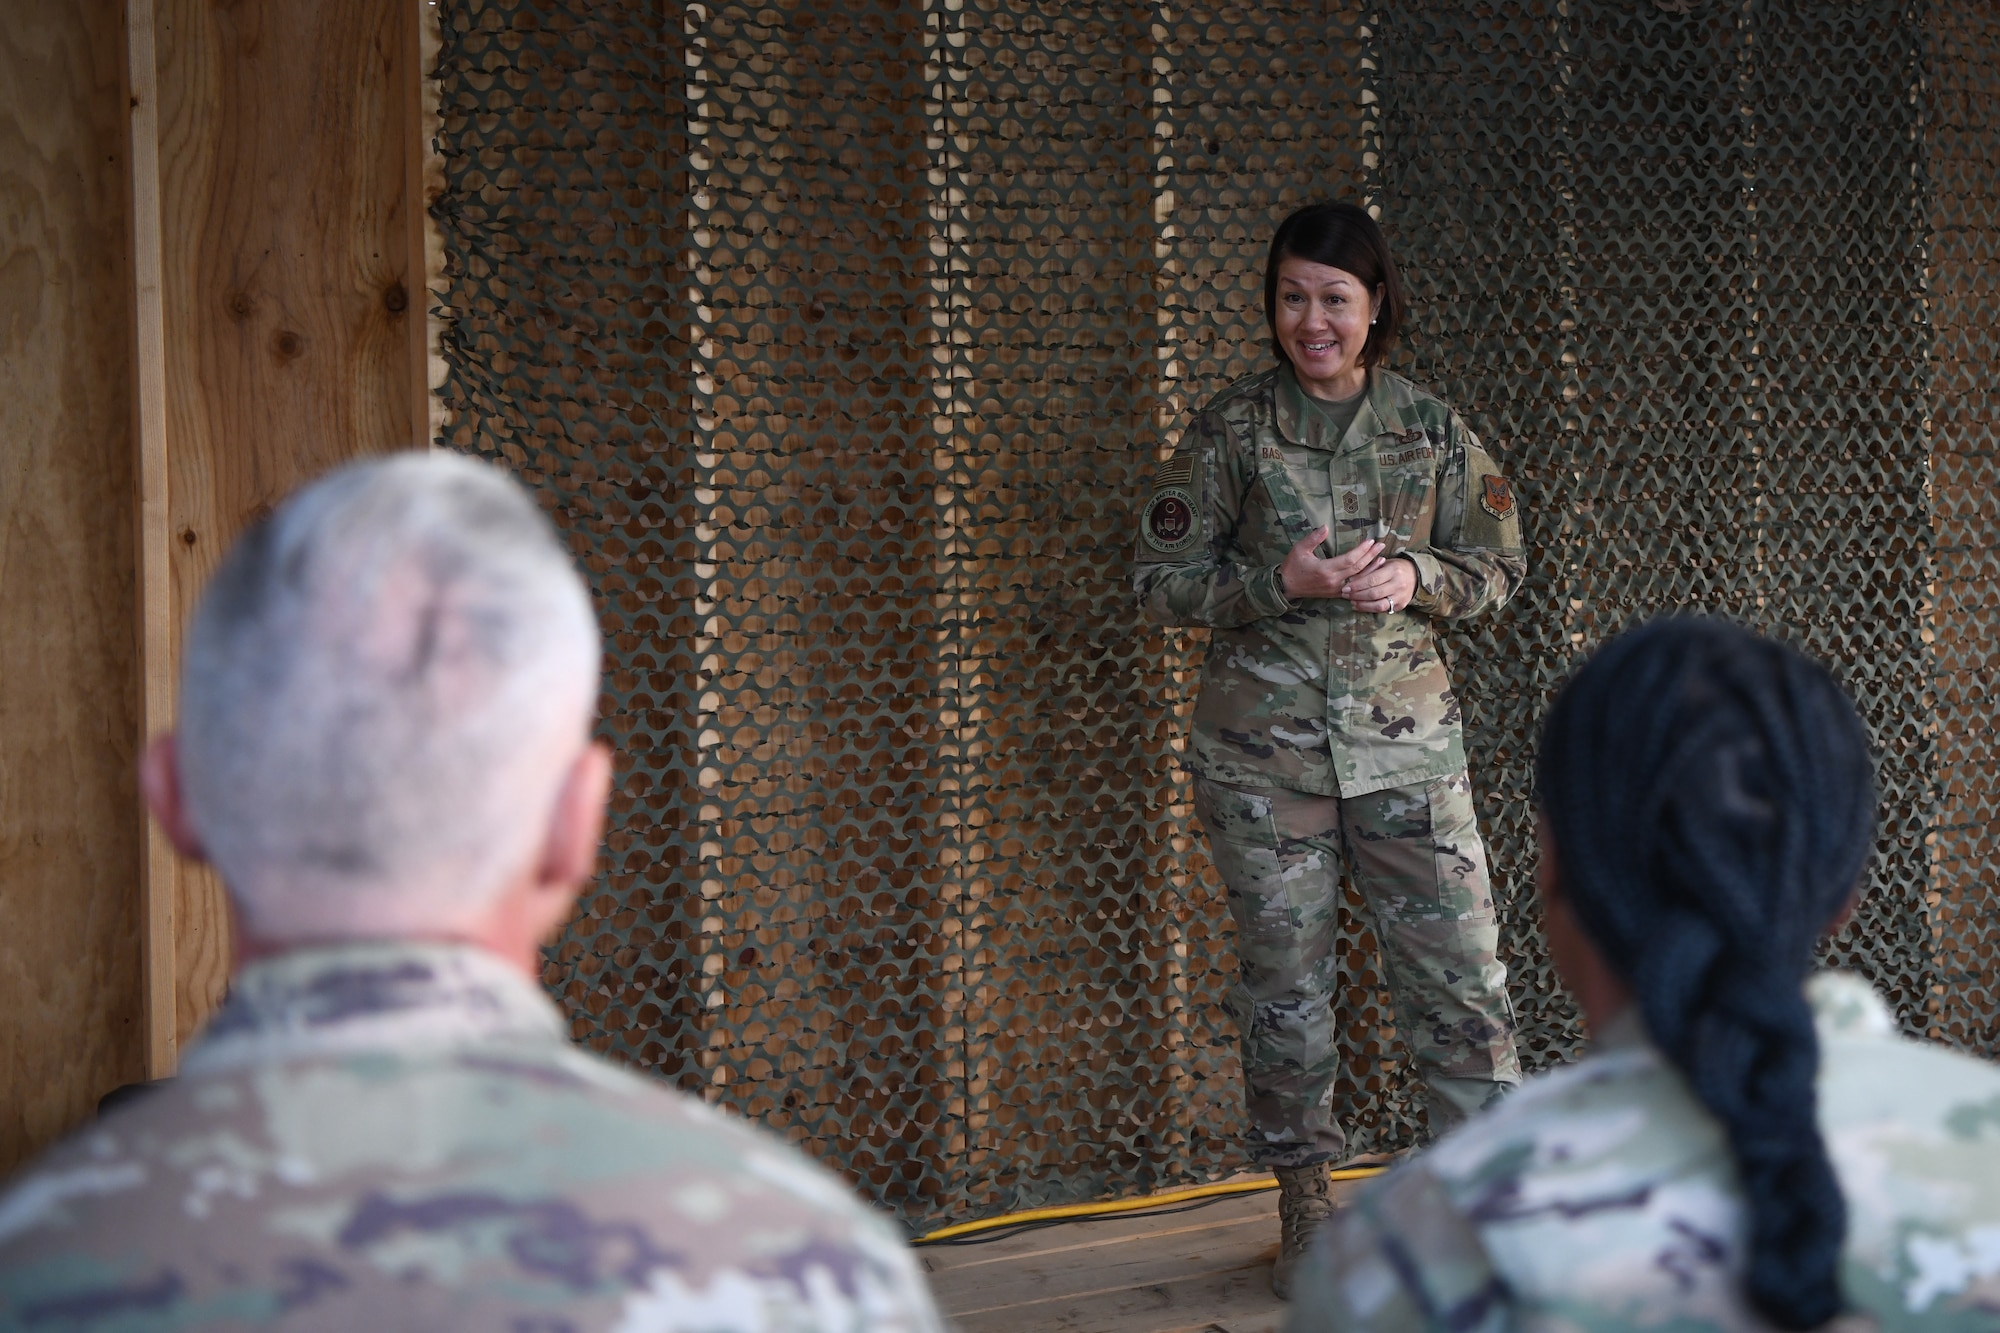 Chief Master Sgt. of the Air Force JoAnne S. Bass speaks to approximately 50 Airmen during an all-call at Nigerien Air Base 101, Niamey, Dec. 22, 2021. During her visit to AB 101, Bass addressed the importance of how the U.S. Air Force must develop and build a deep intuitive understanding of our strategic competitors, and reward and retain Airmen who foster the personal attributes necessary for success. (U.S. Air Force photo by Senior Airman Ericka A. Woolever)